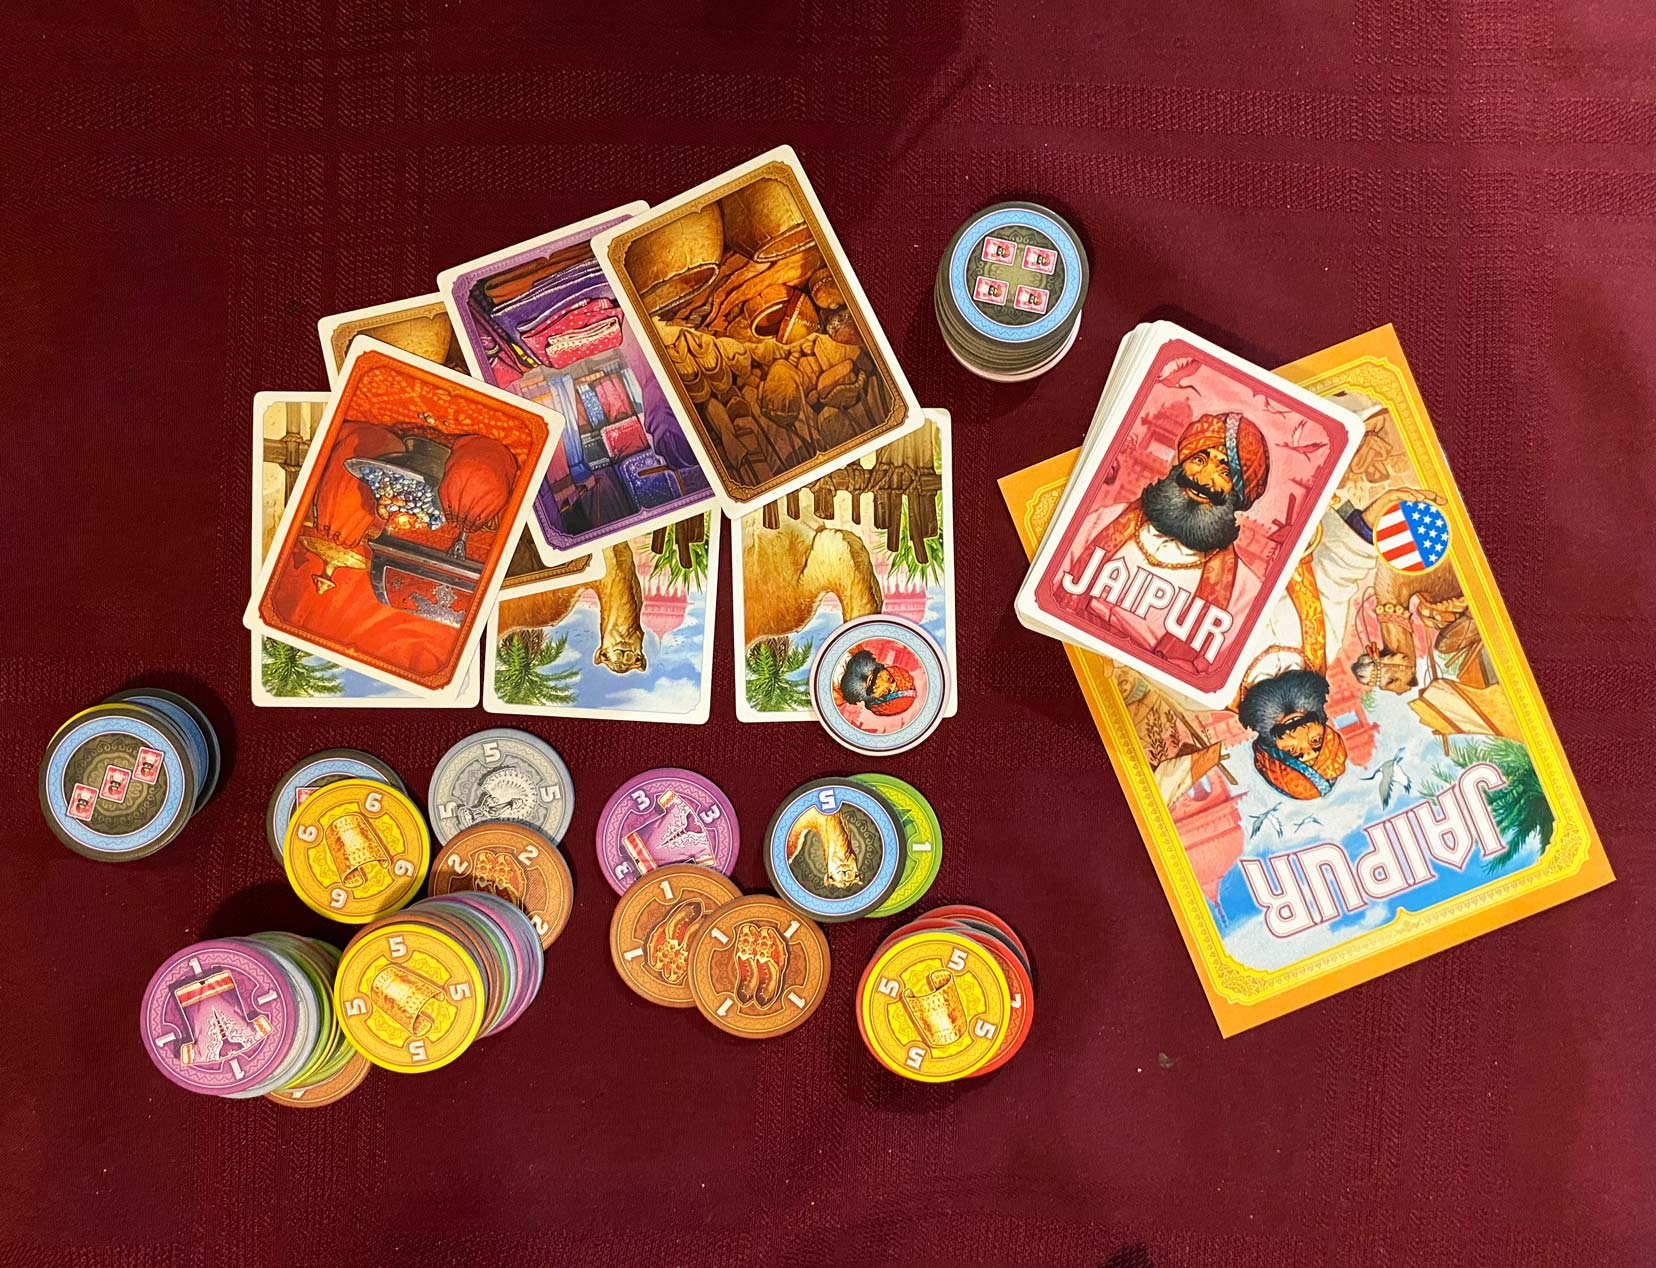 Jaipur game set up with cards, money tokens 